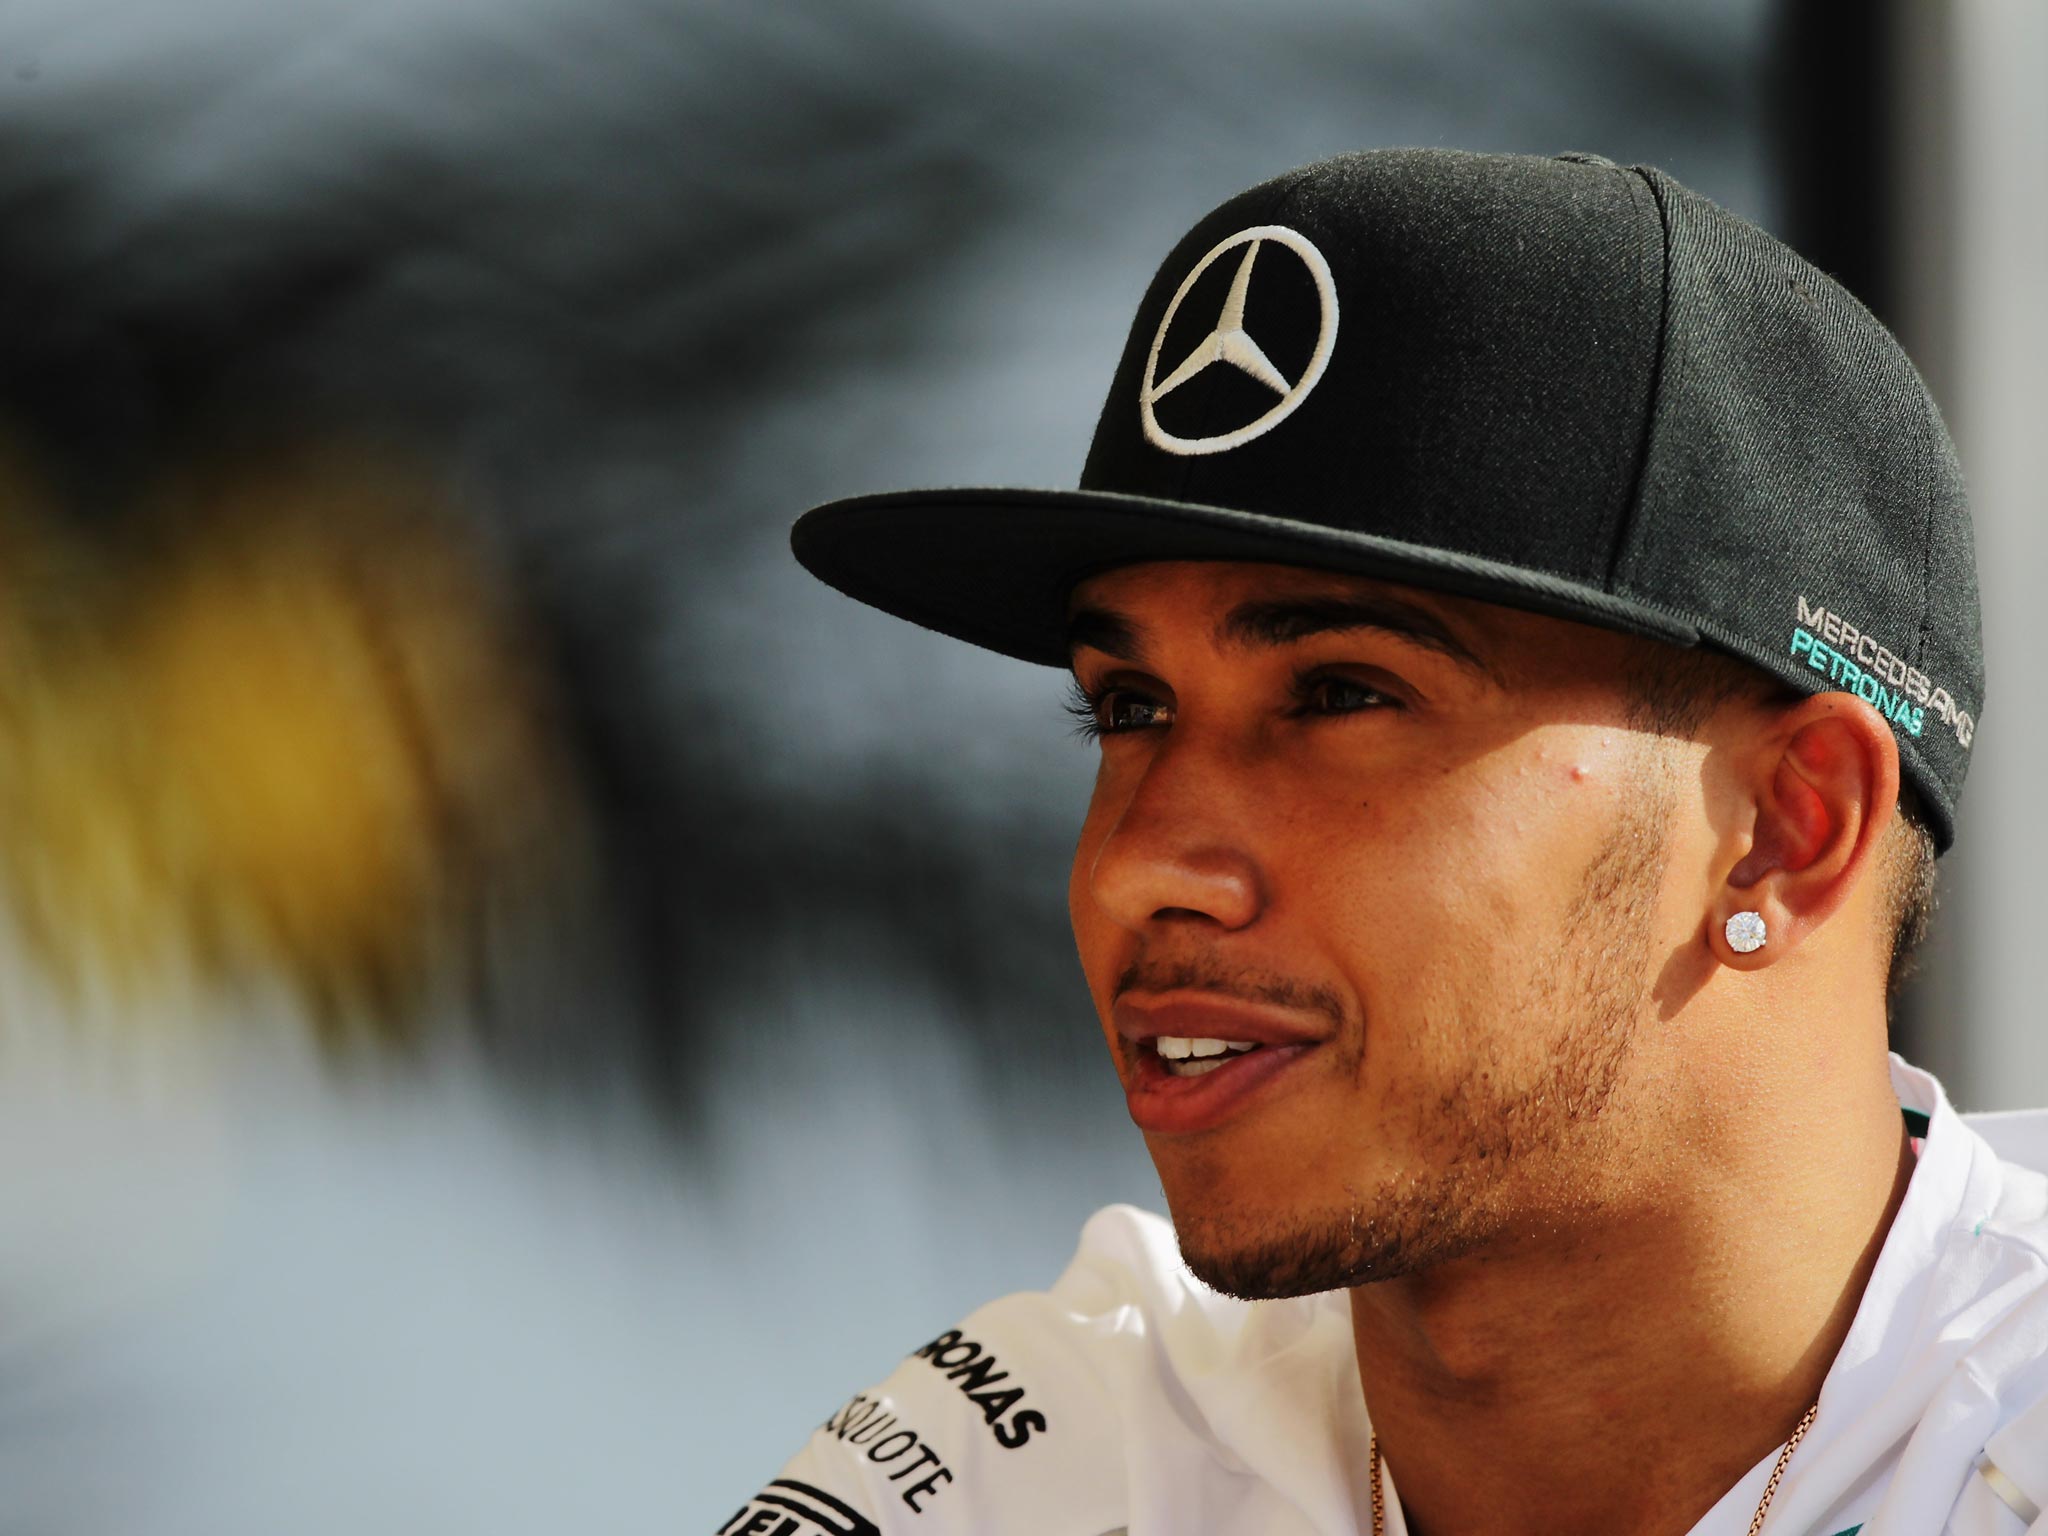 Lewis Hamilton has stressed that Mercedes won't know if they have an advantage until they take to the track in Melbourne